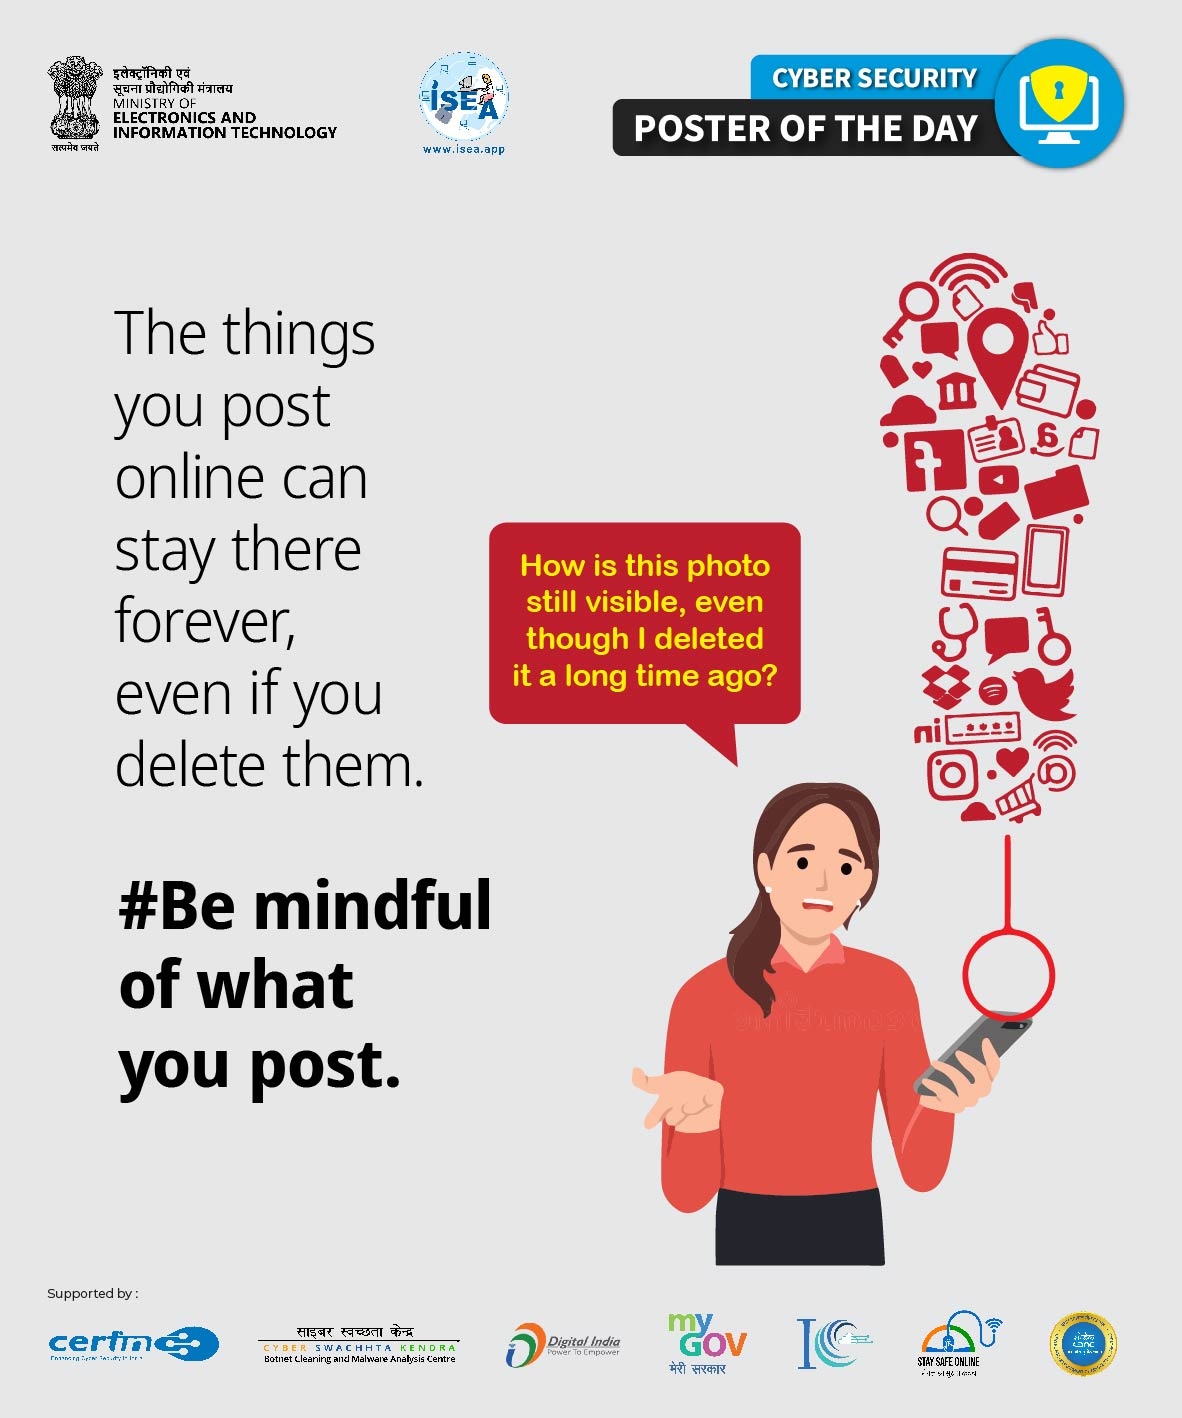 Be mindful of what you post